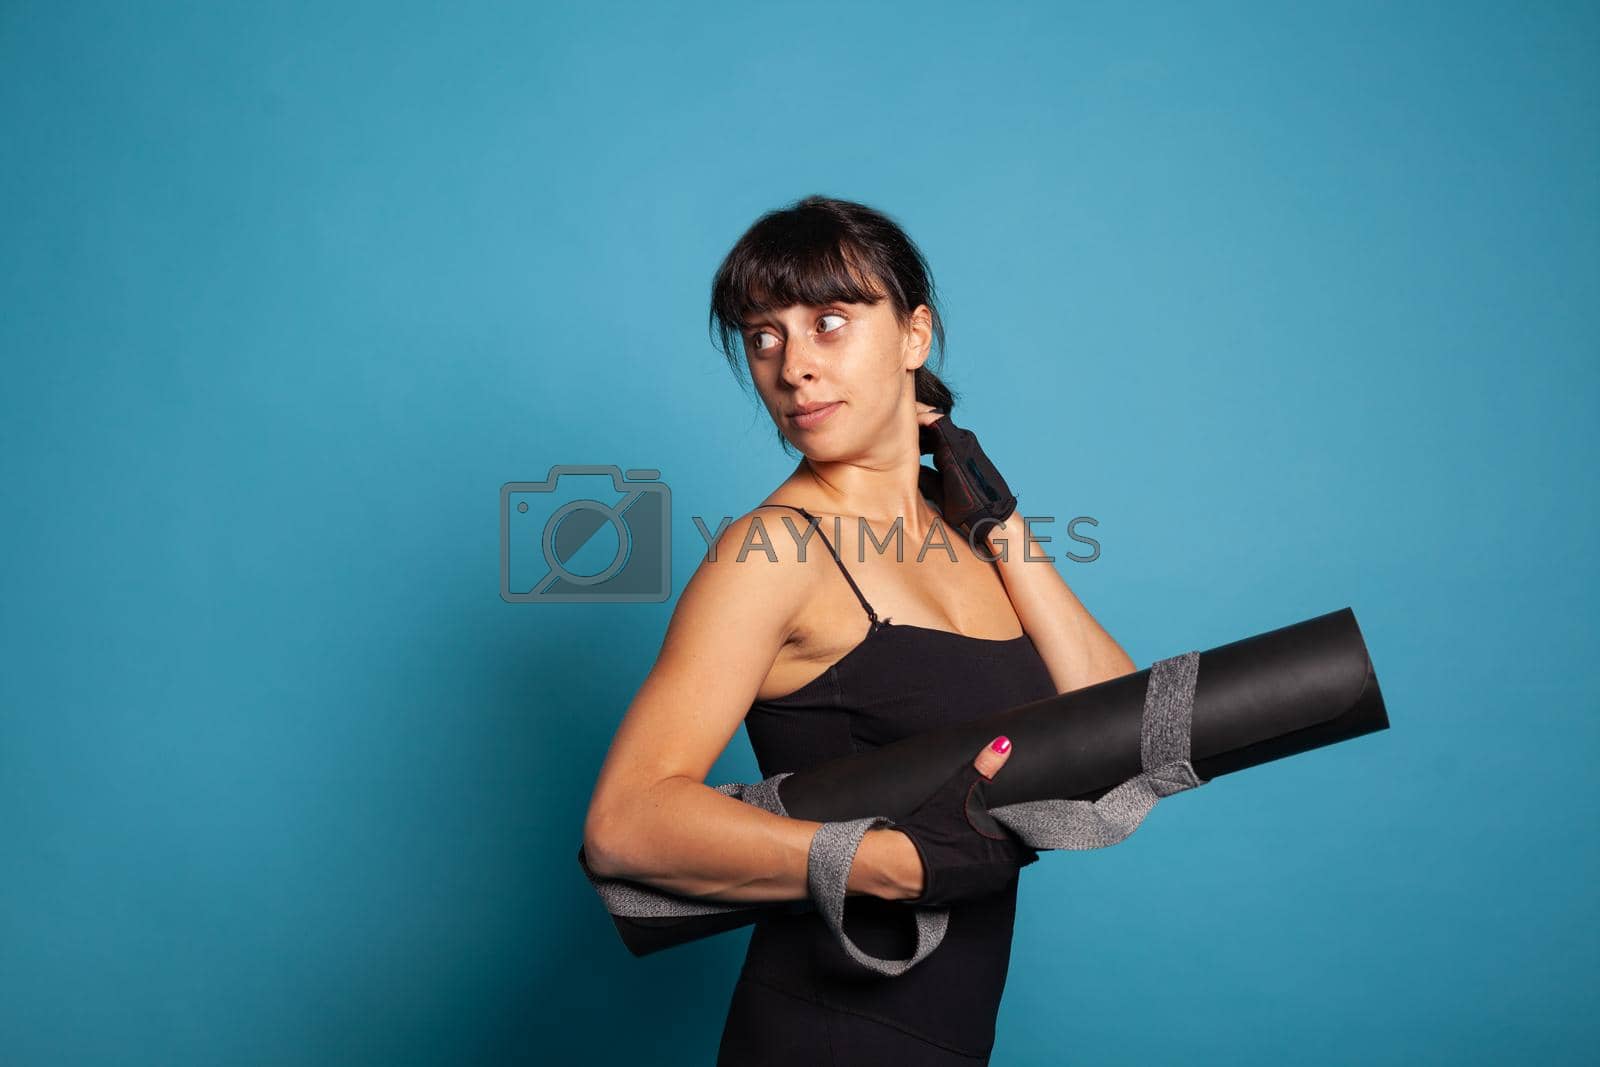 Athletic person holding yoga mat after finising fitness workout practicing strench exercices. Personal trainer stretching arm muscles working at body endurance practicing sport activity